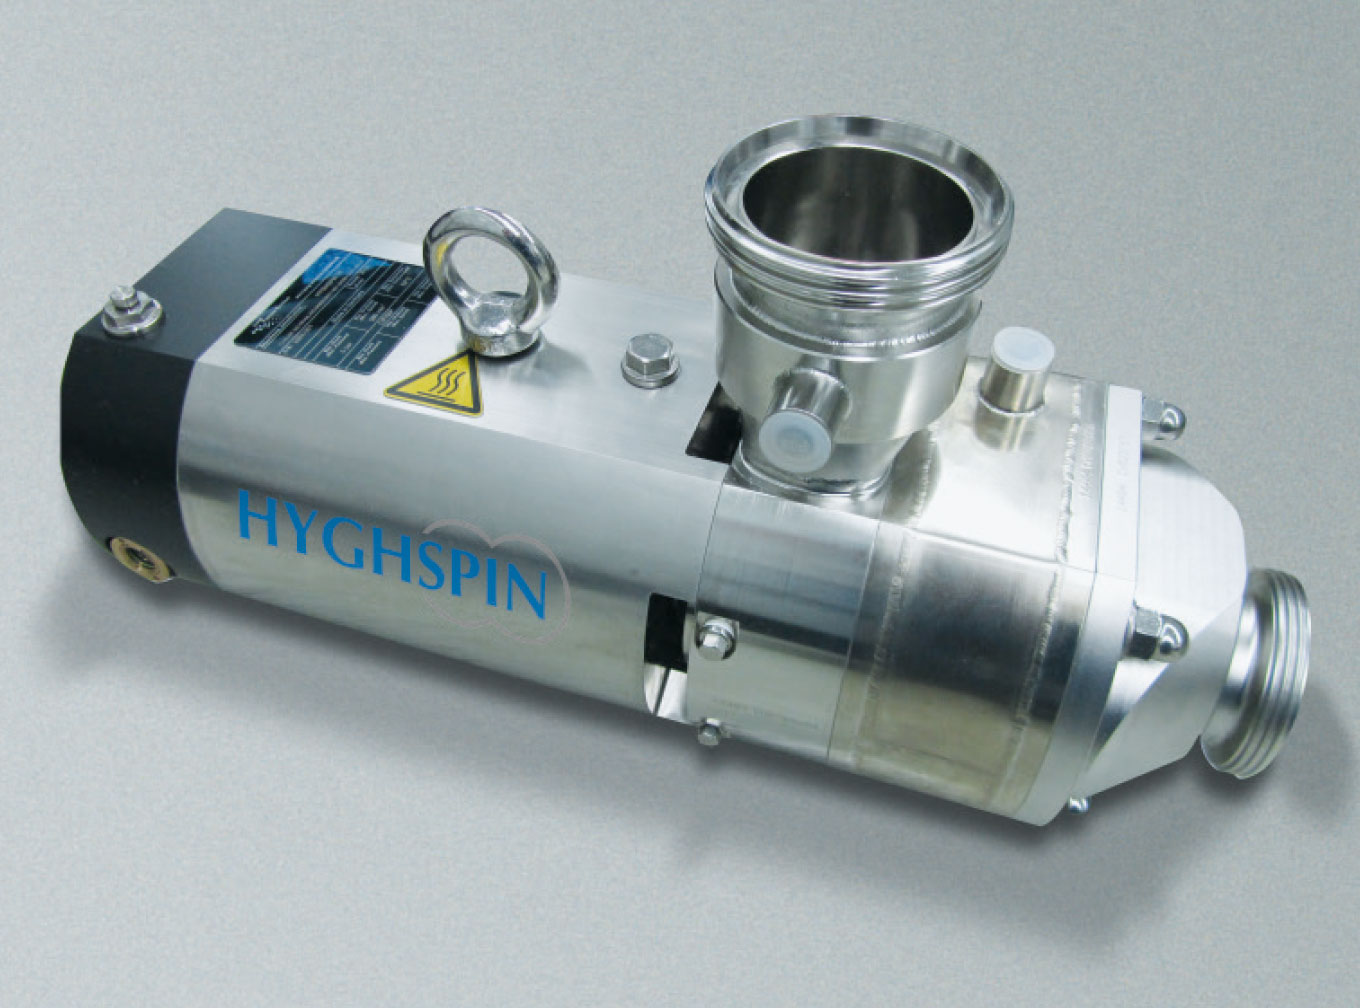 HYGHSPIN Engineered with heated housing and outlet